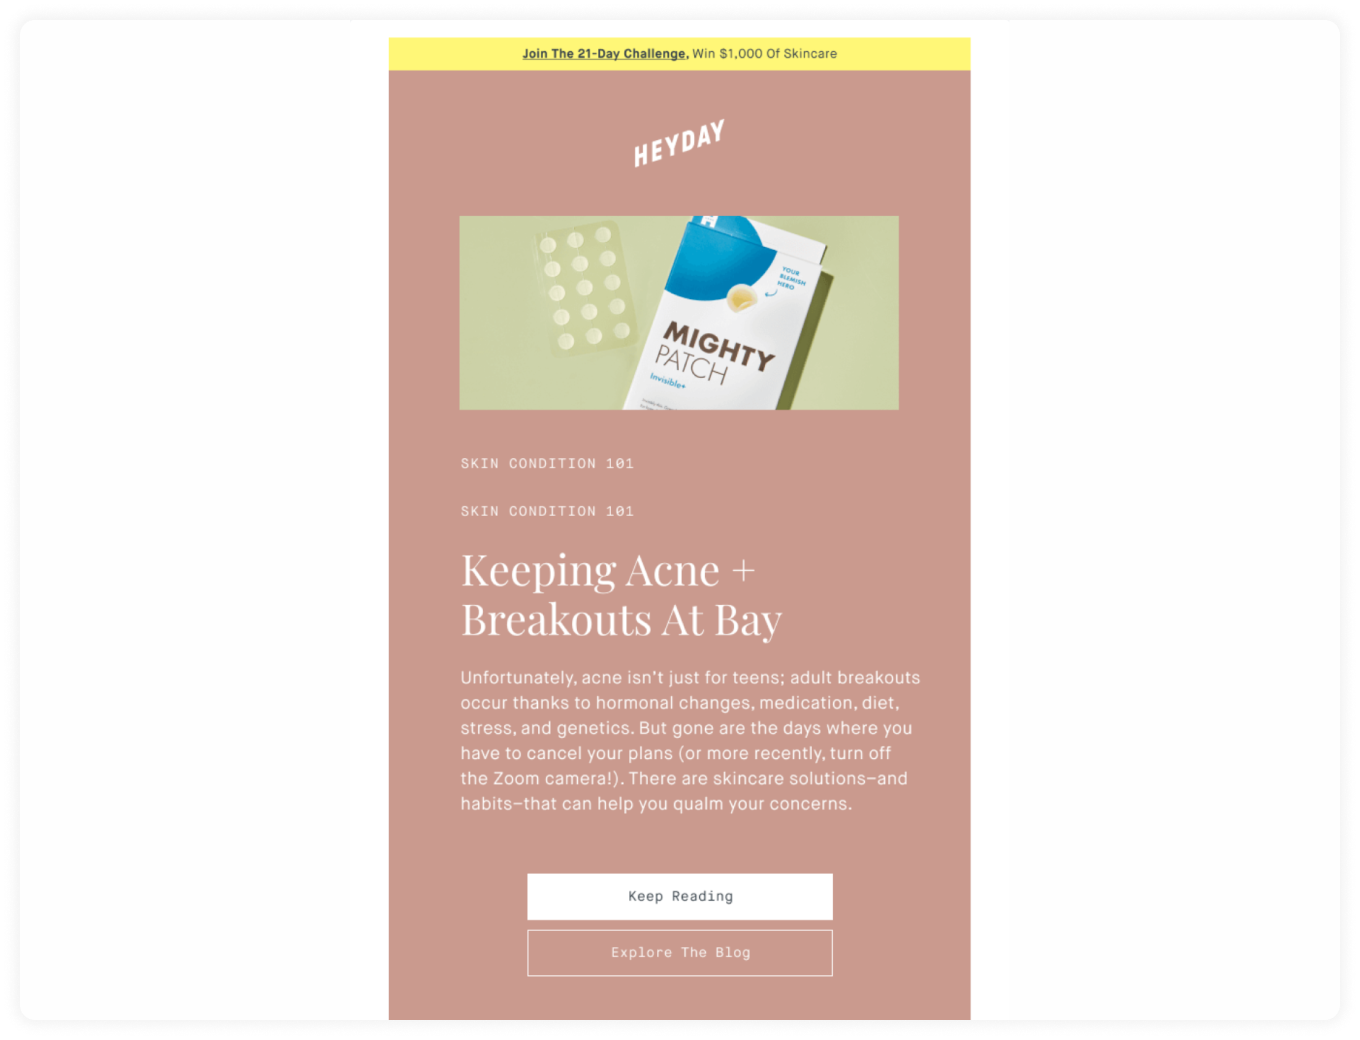 Heyday email promoting their blog post